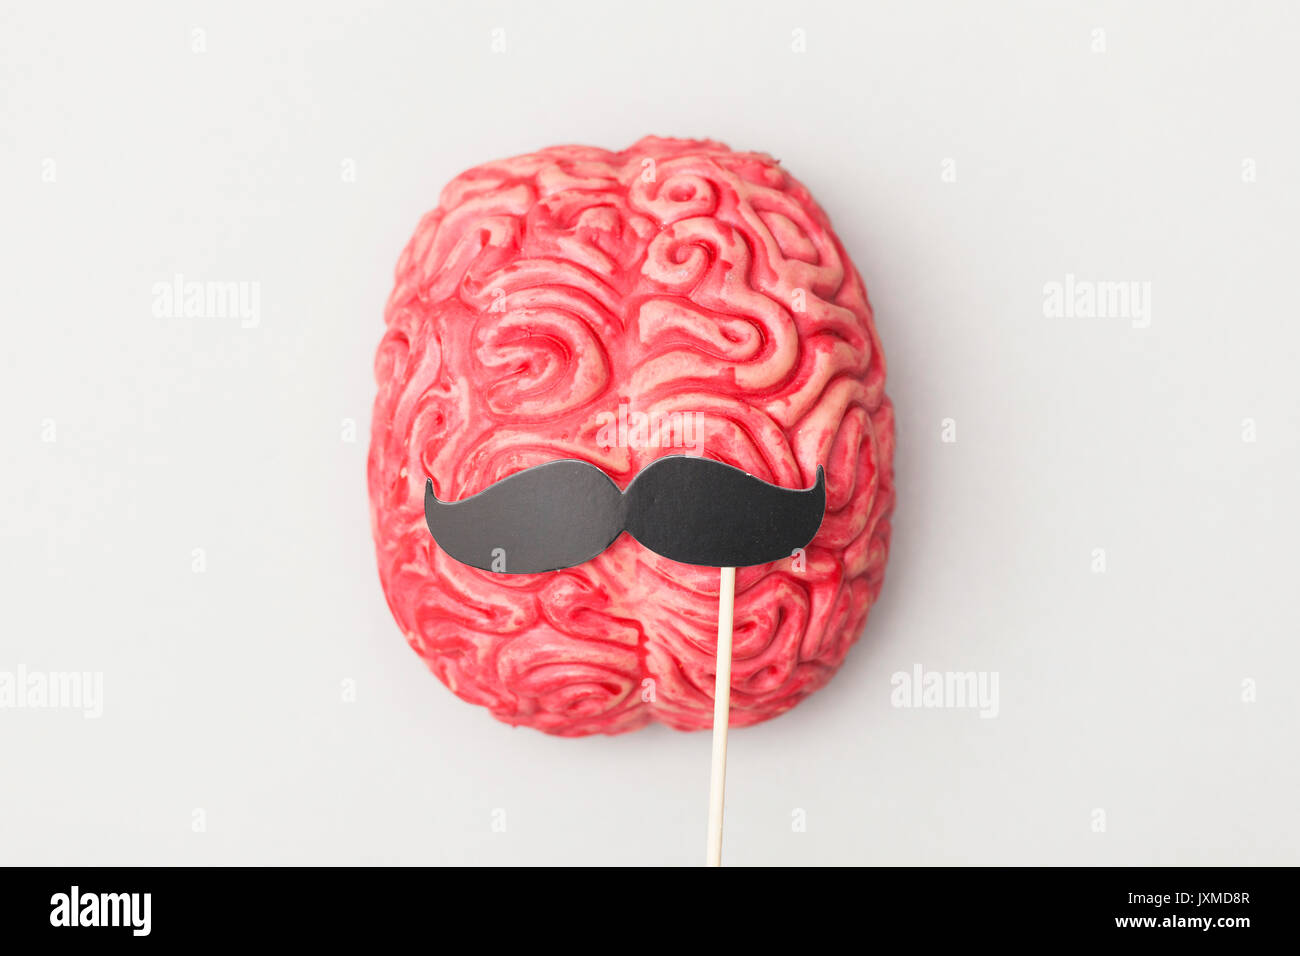 Human brain with comedy props Stock Photo